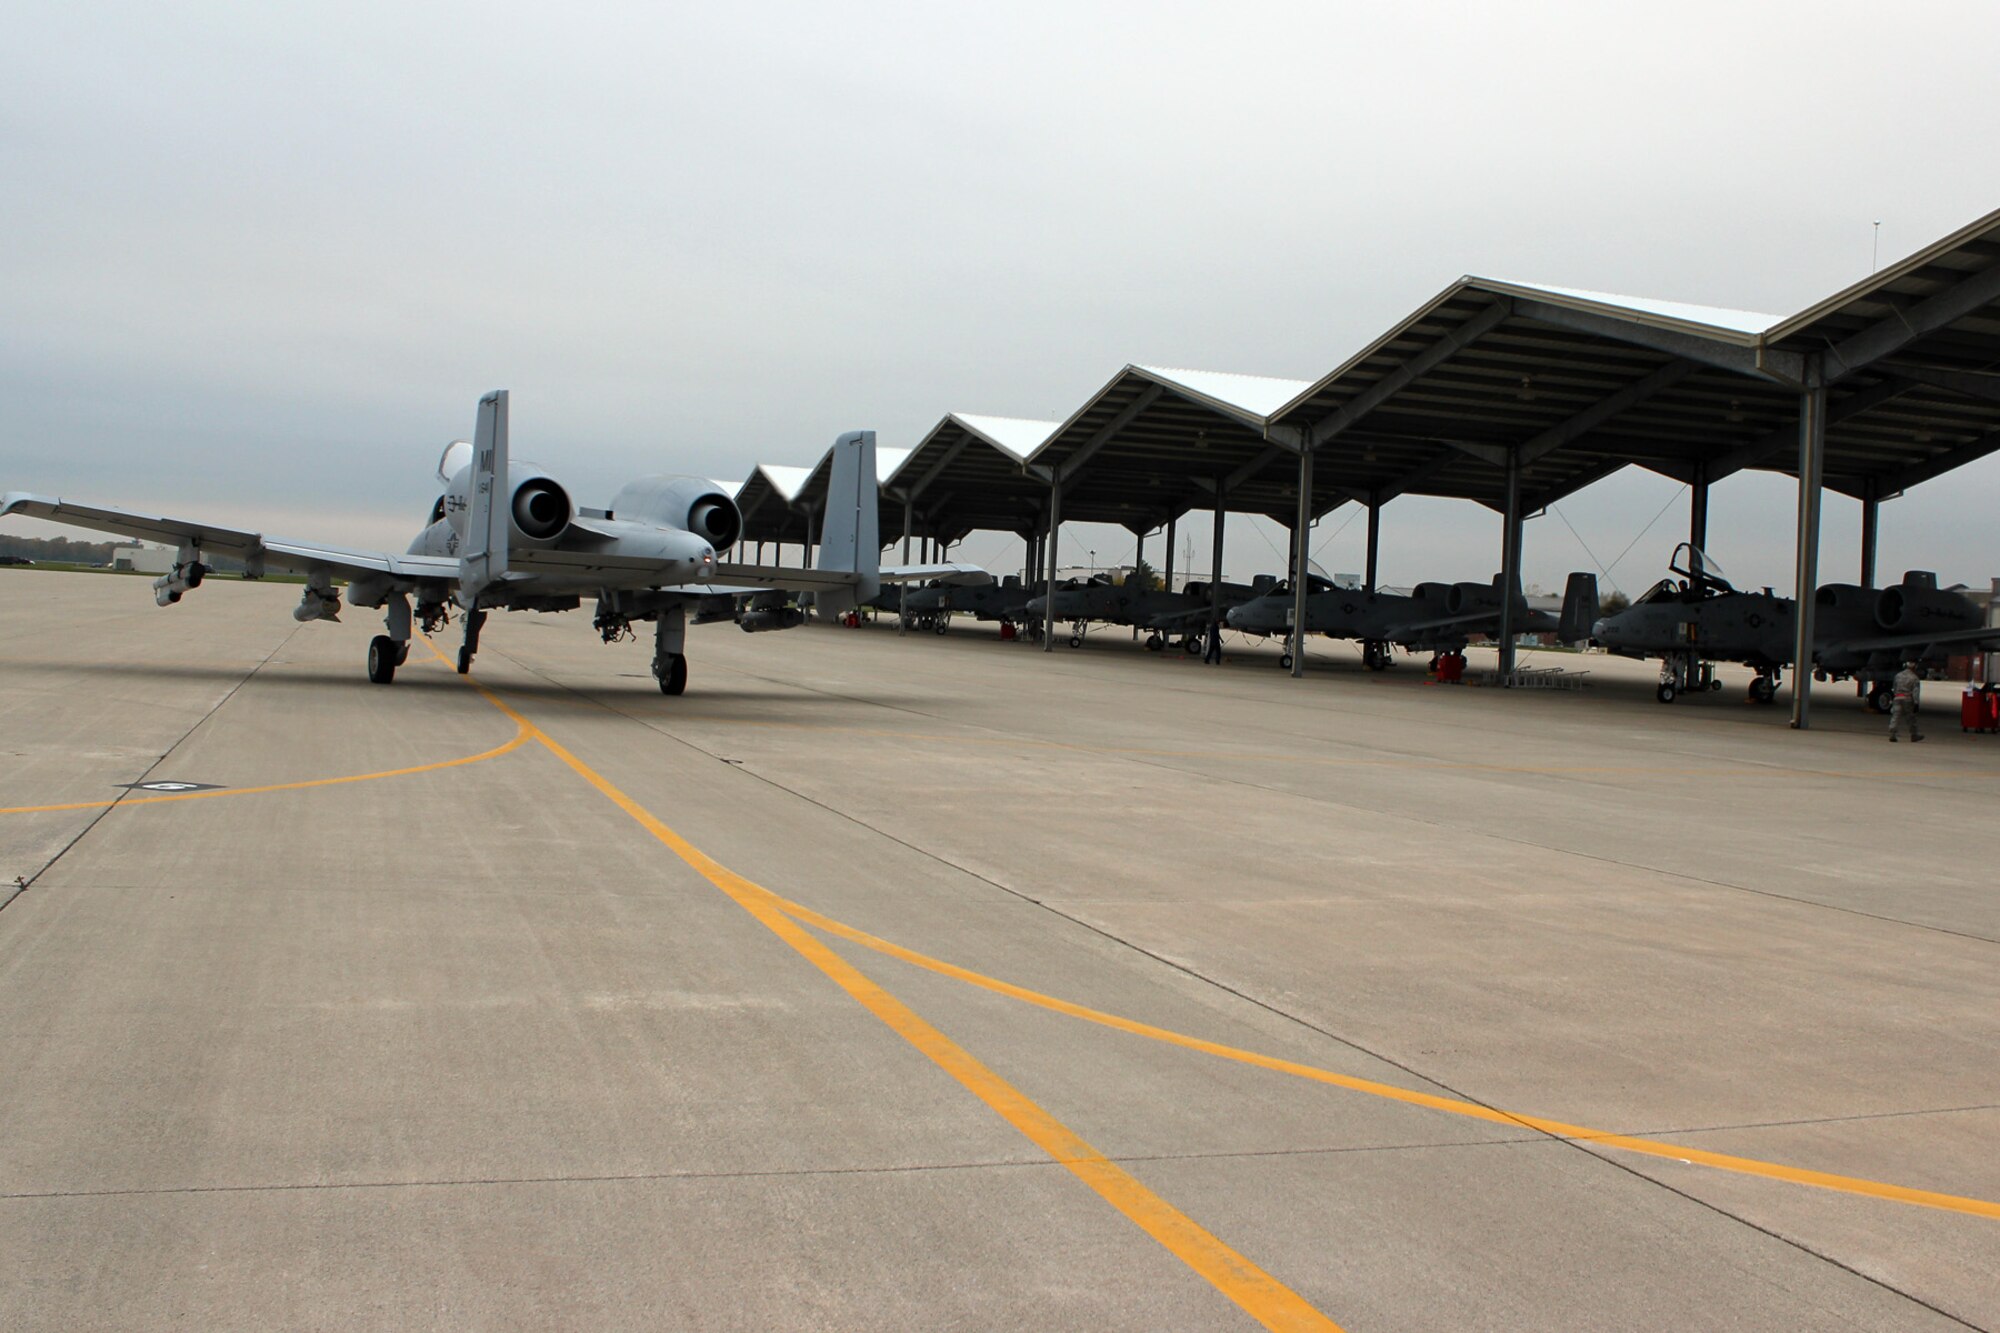 131017-Z-VA676-029 – An A-10 Thunderbolt II taxis out to the runway prior to take-off at Selfridge Air National Guard Base, Mich., Oct. 17, 2013. The sorties generated at Selfridge on Oct. 17 were the first for the 127th Wing at the base since before the partial government shutdown began on Oct. 1. Selfridge personnel launched both A-10s and KC-135 Stratotankers on Oct. 17. (Air National Guard photo by TSgt. Dan Heaton / Released)